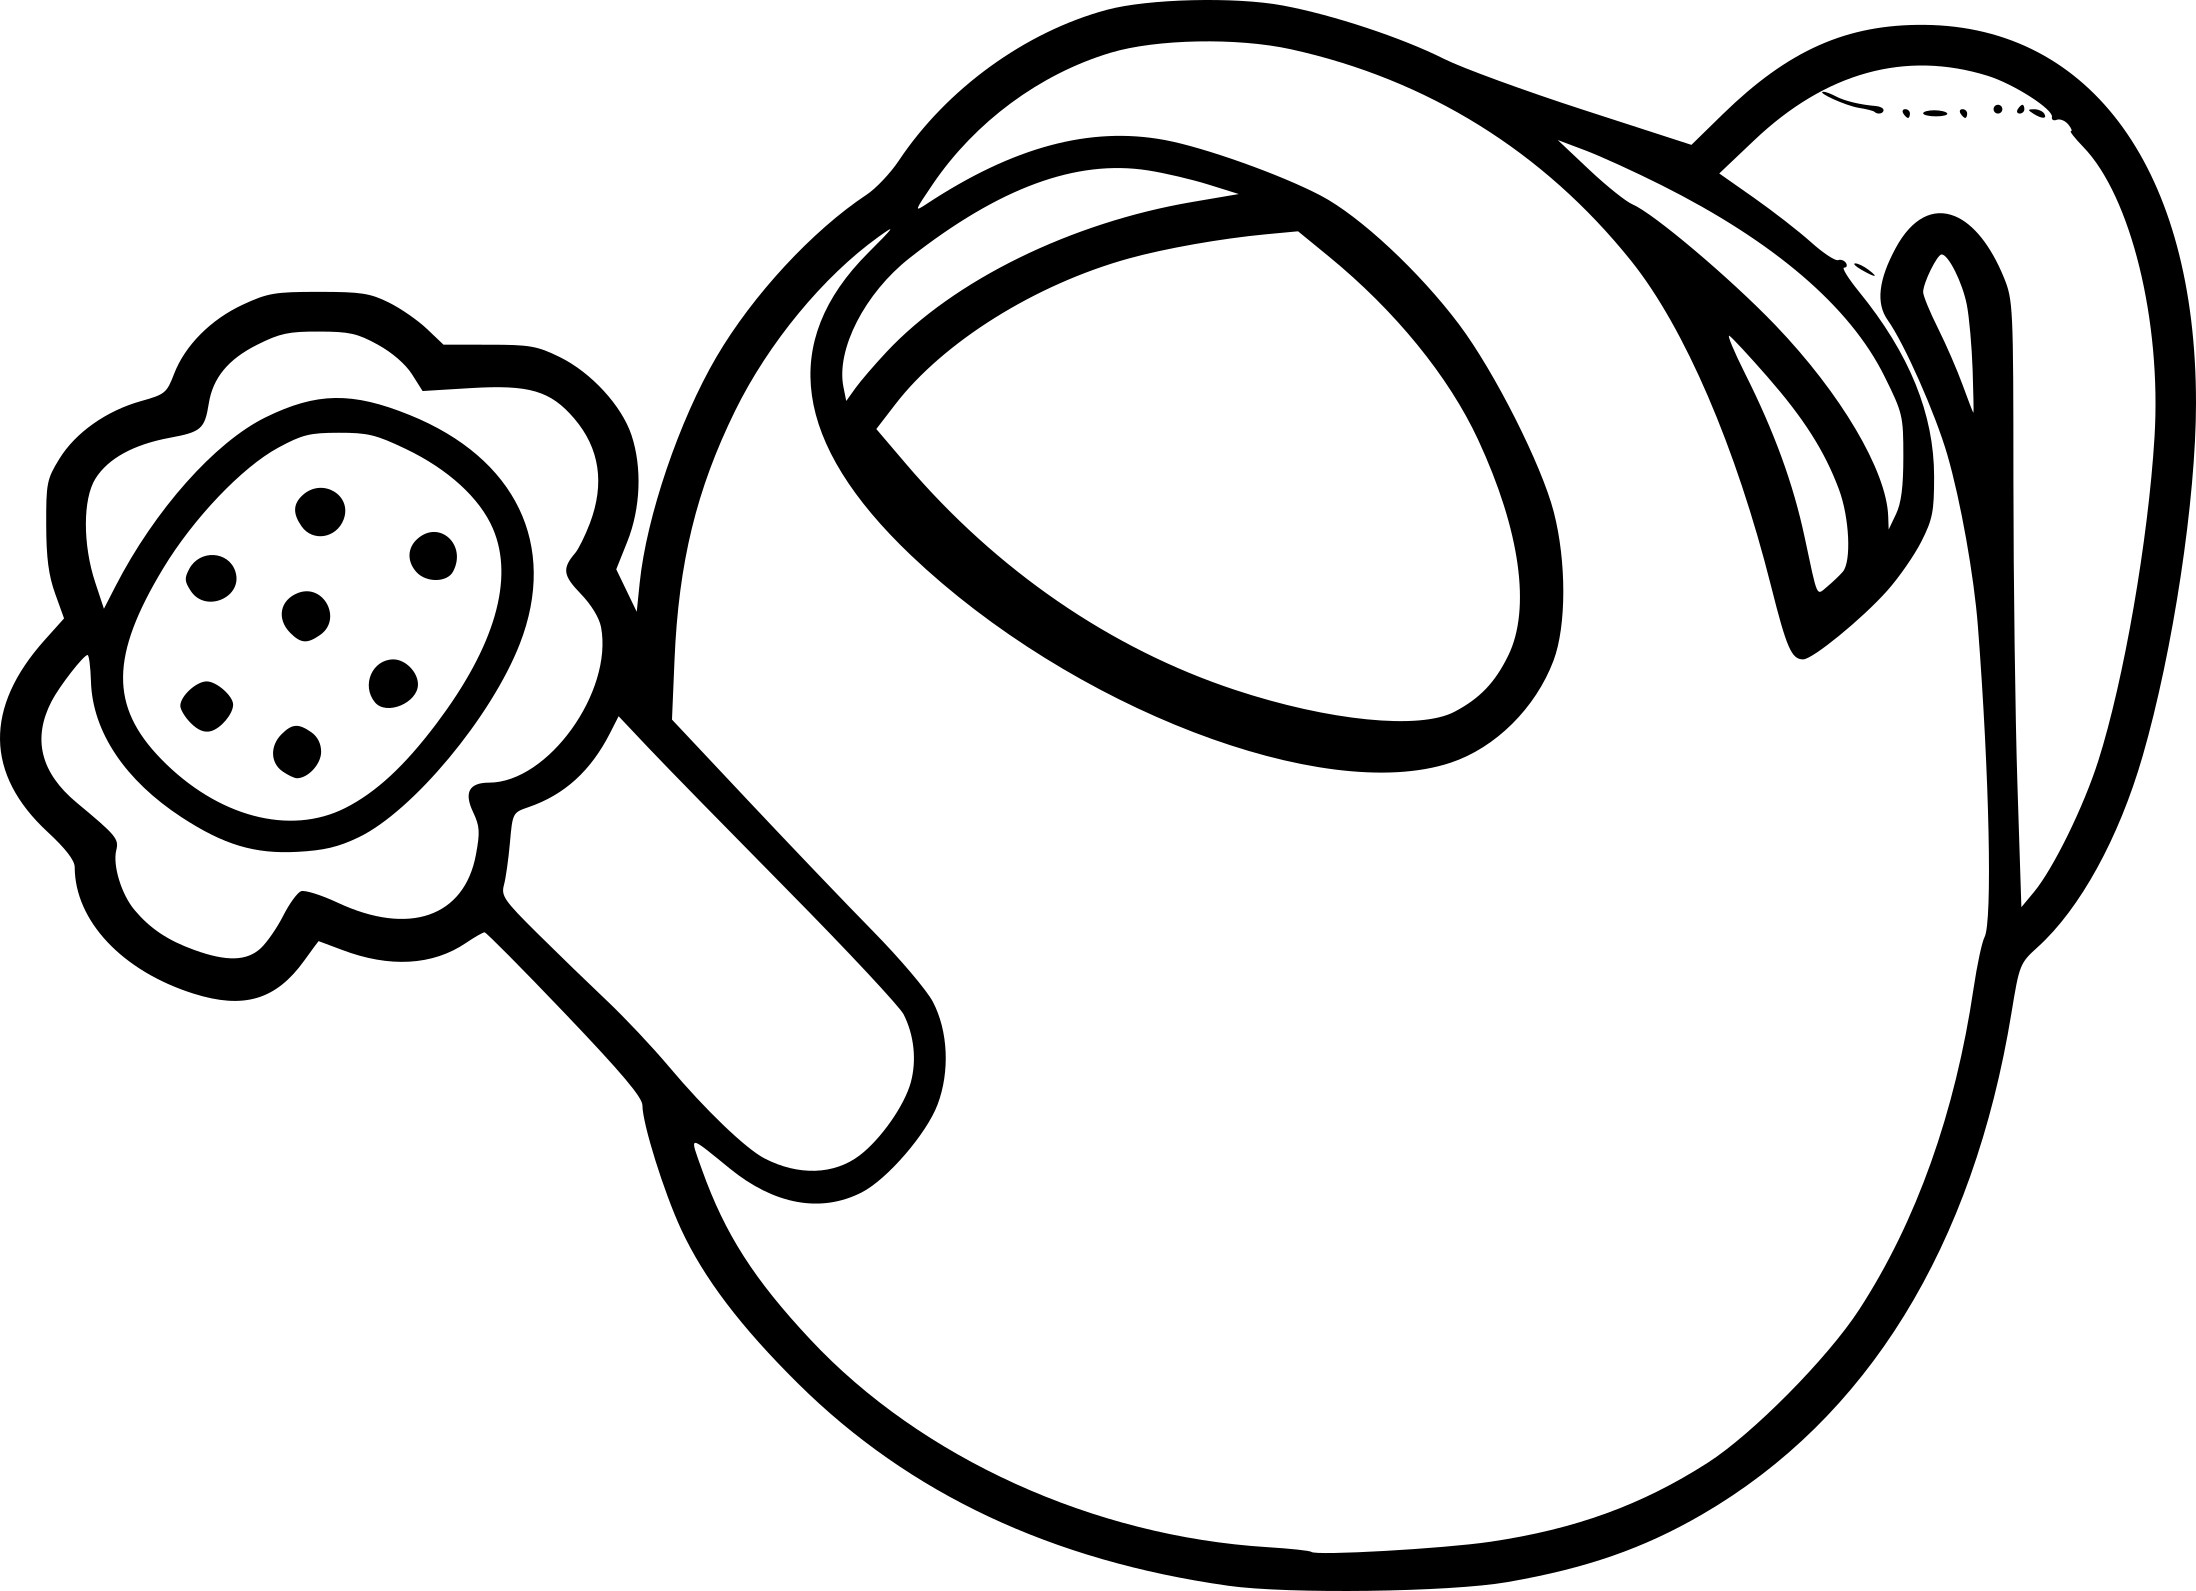 Watering Can coloring page